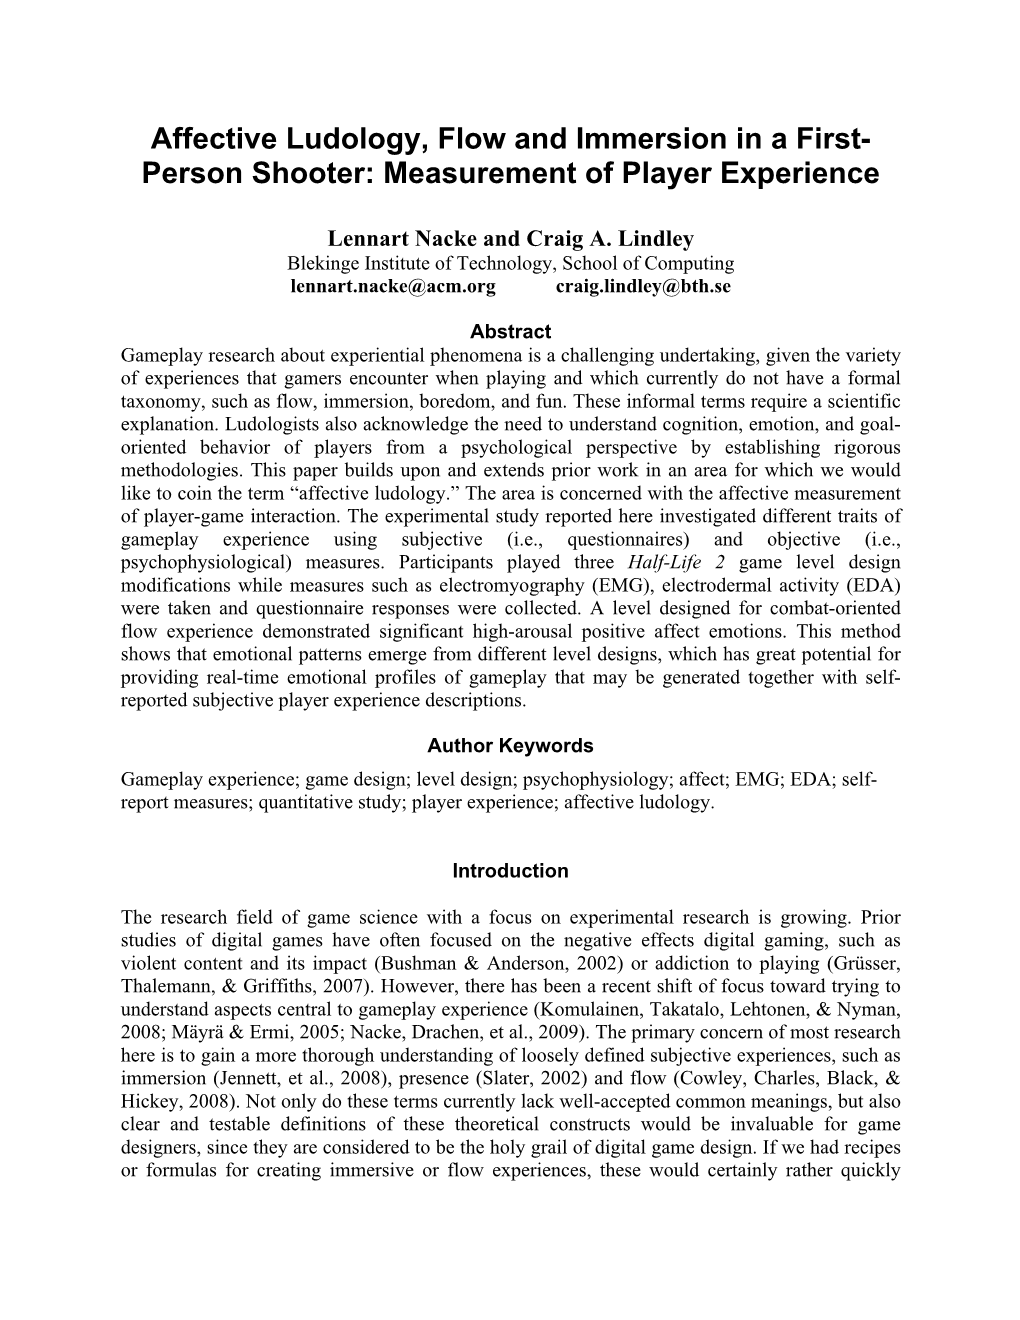 Affective Ludology, Flow and Immersion in a First- Person Shooter: Measurement of Player Experience